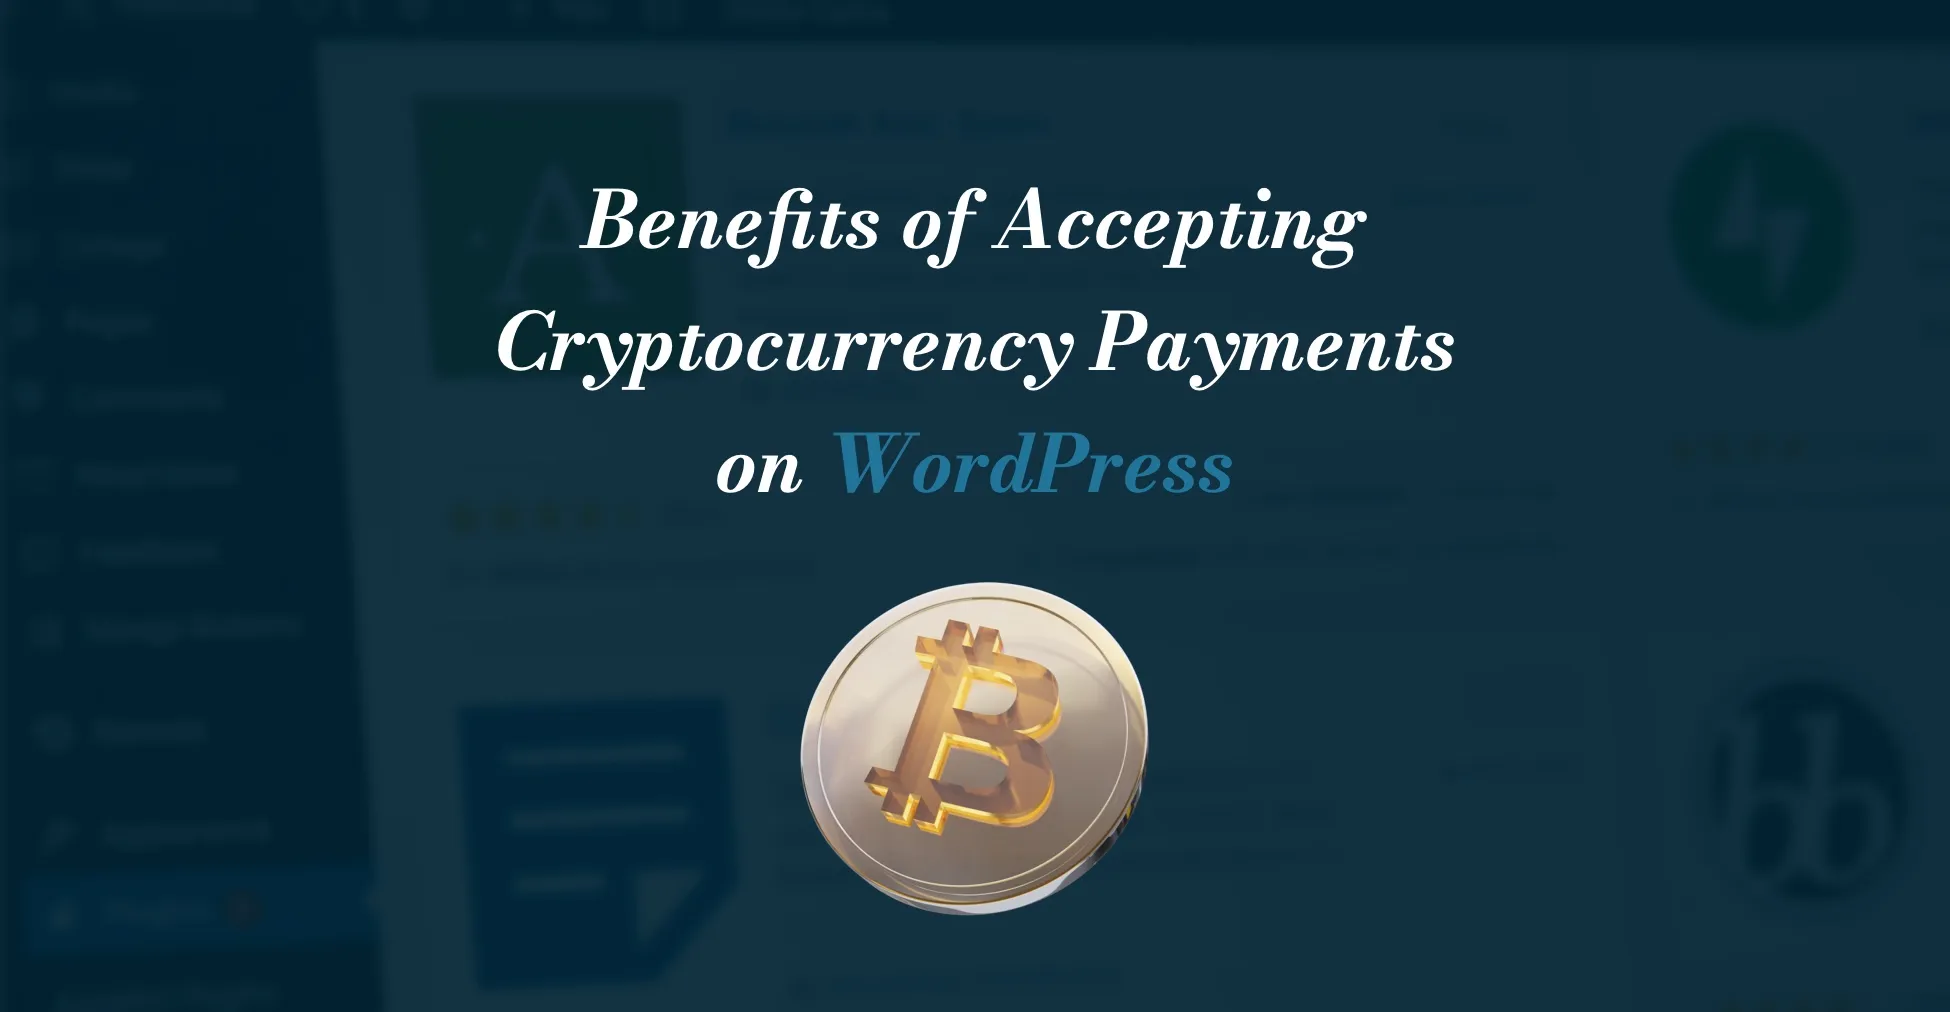 Benefits of Accepting Cryptocurrency Payments on WordPress